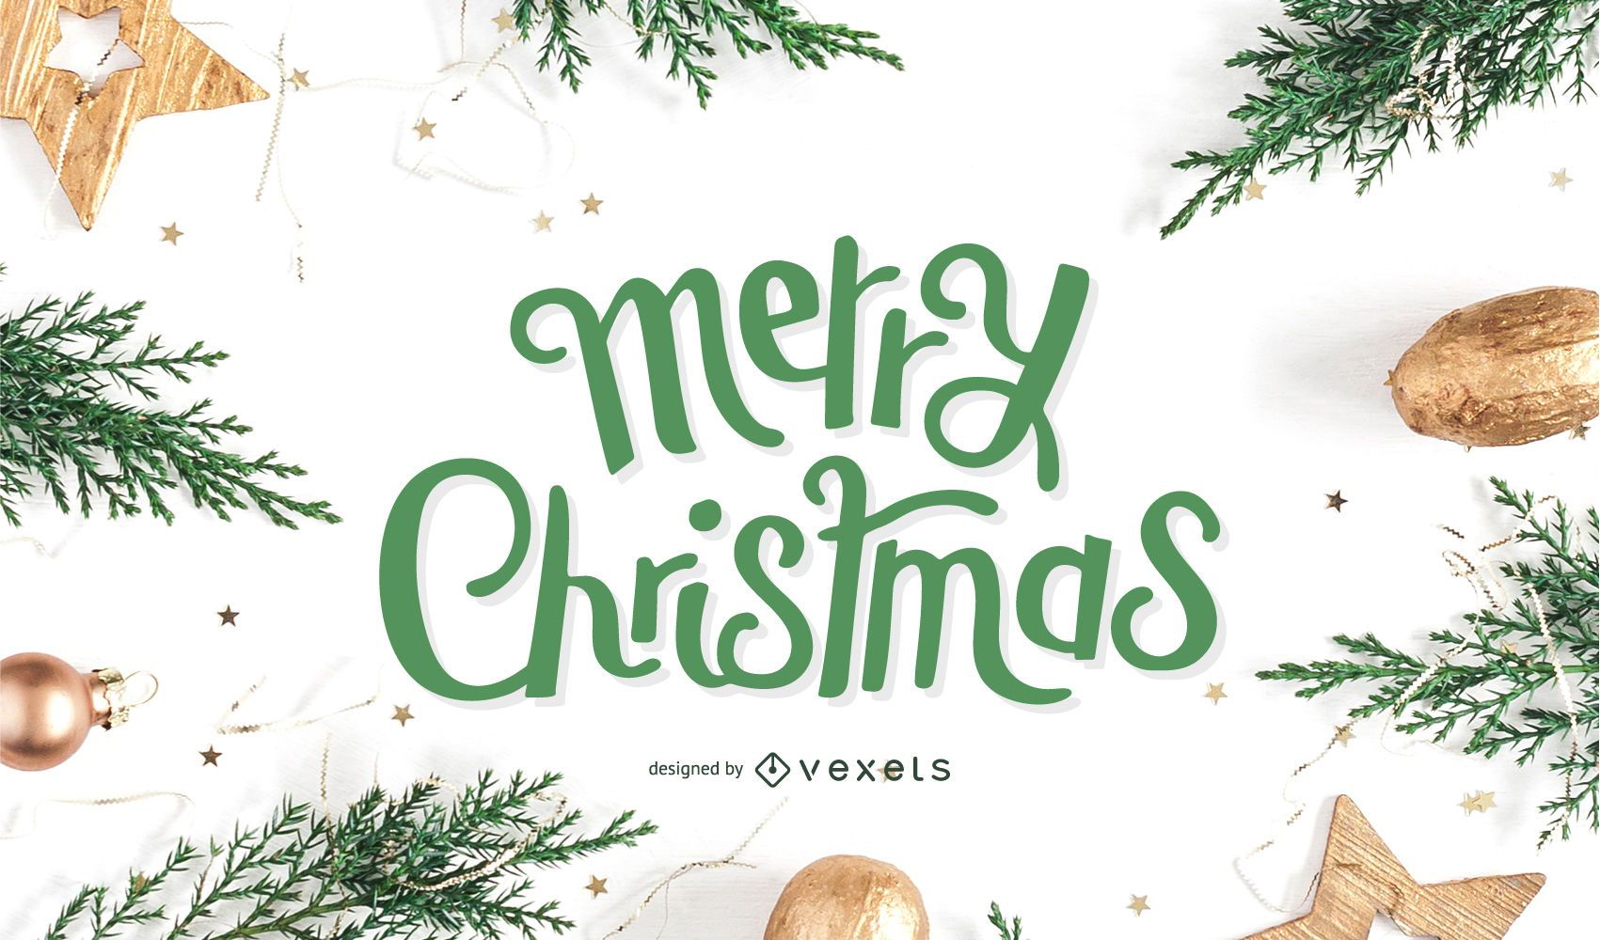 merry-christmas-lettering-design-vector-download